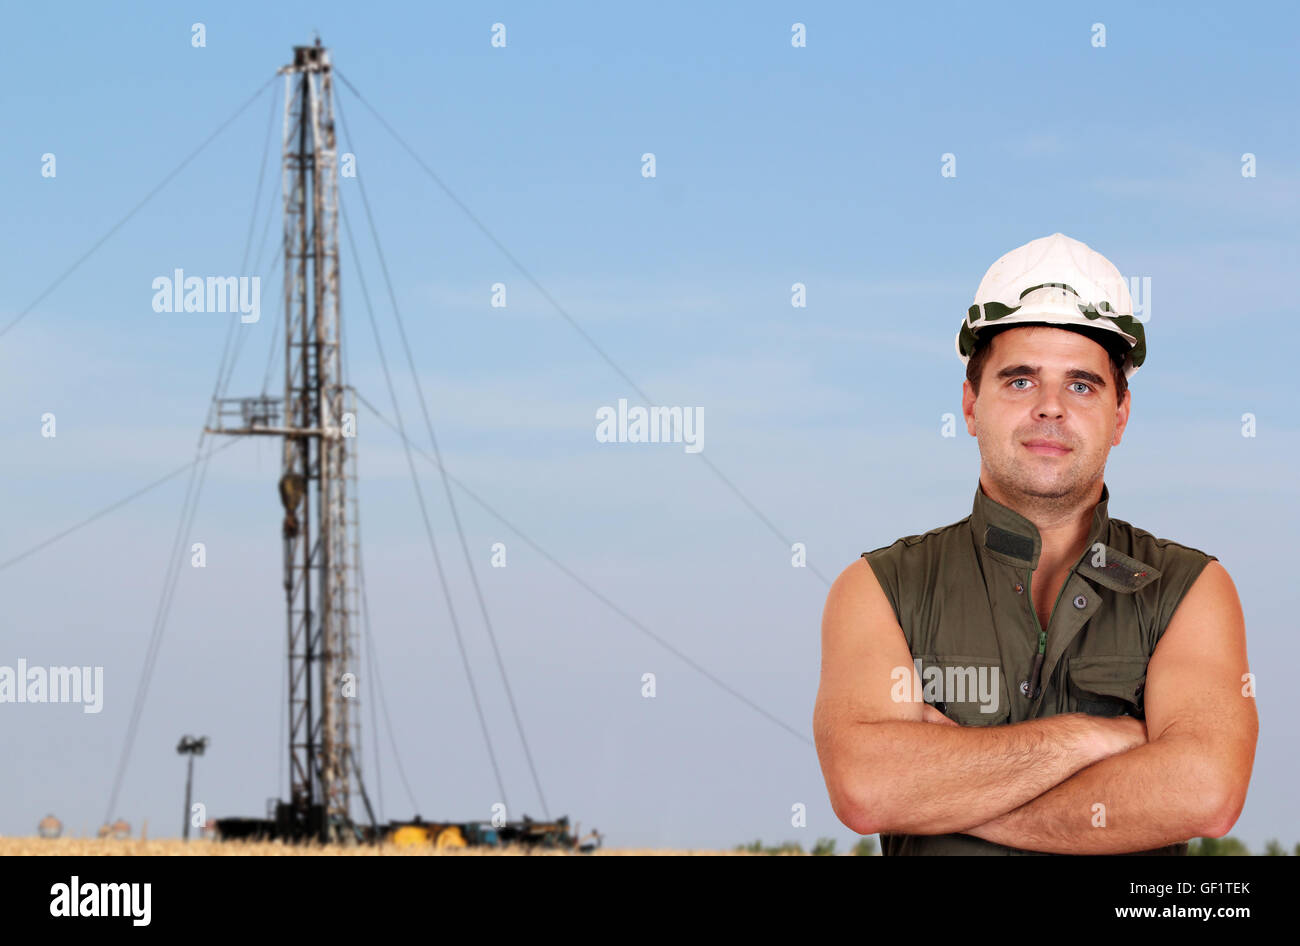 oil worker and oil rig Stock Photo